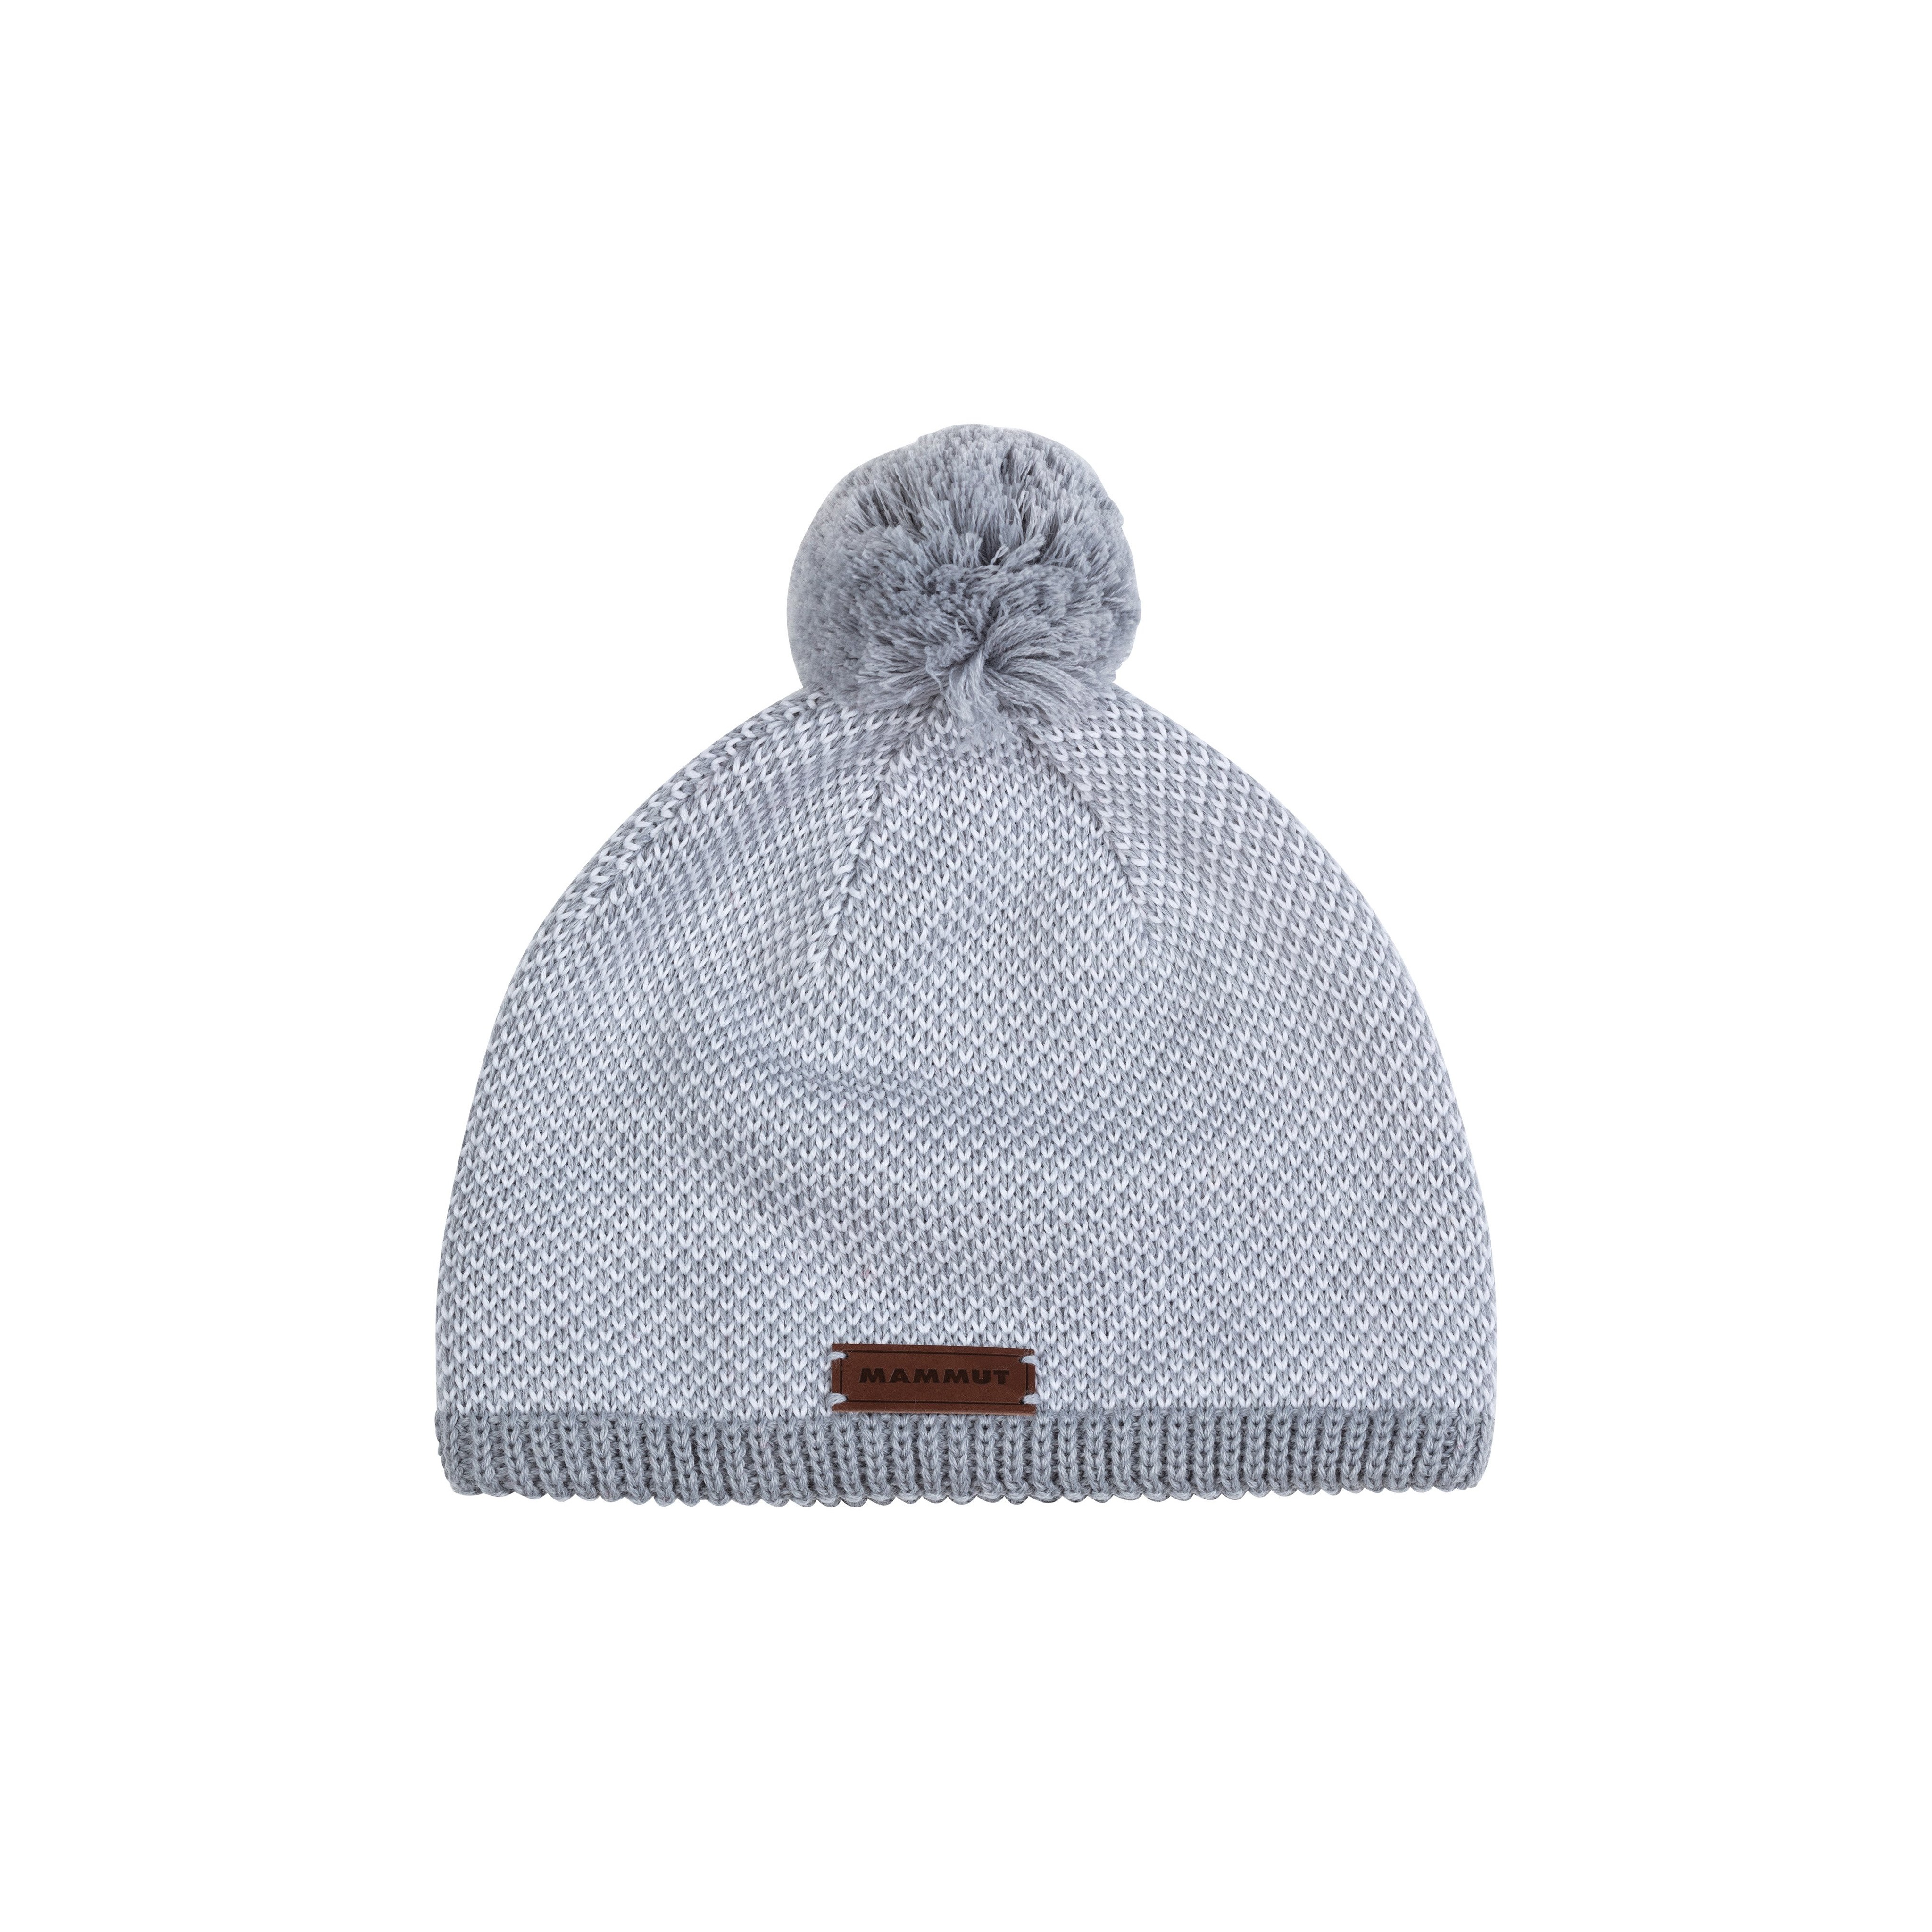 Snow Beanie - highway-white, one size product image